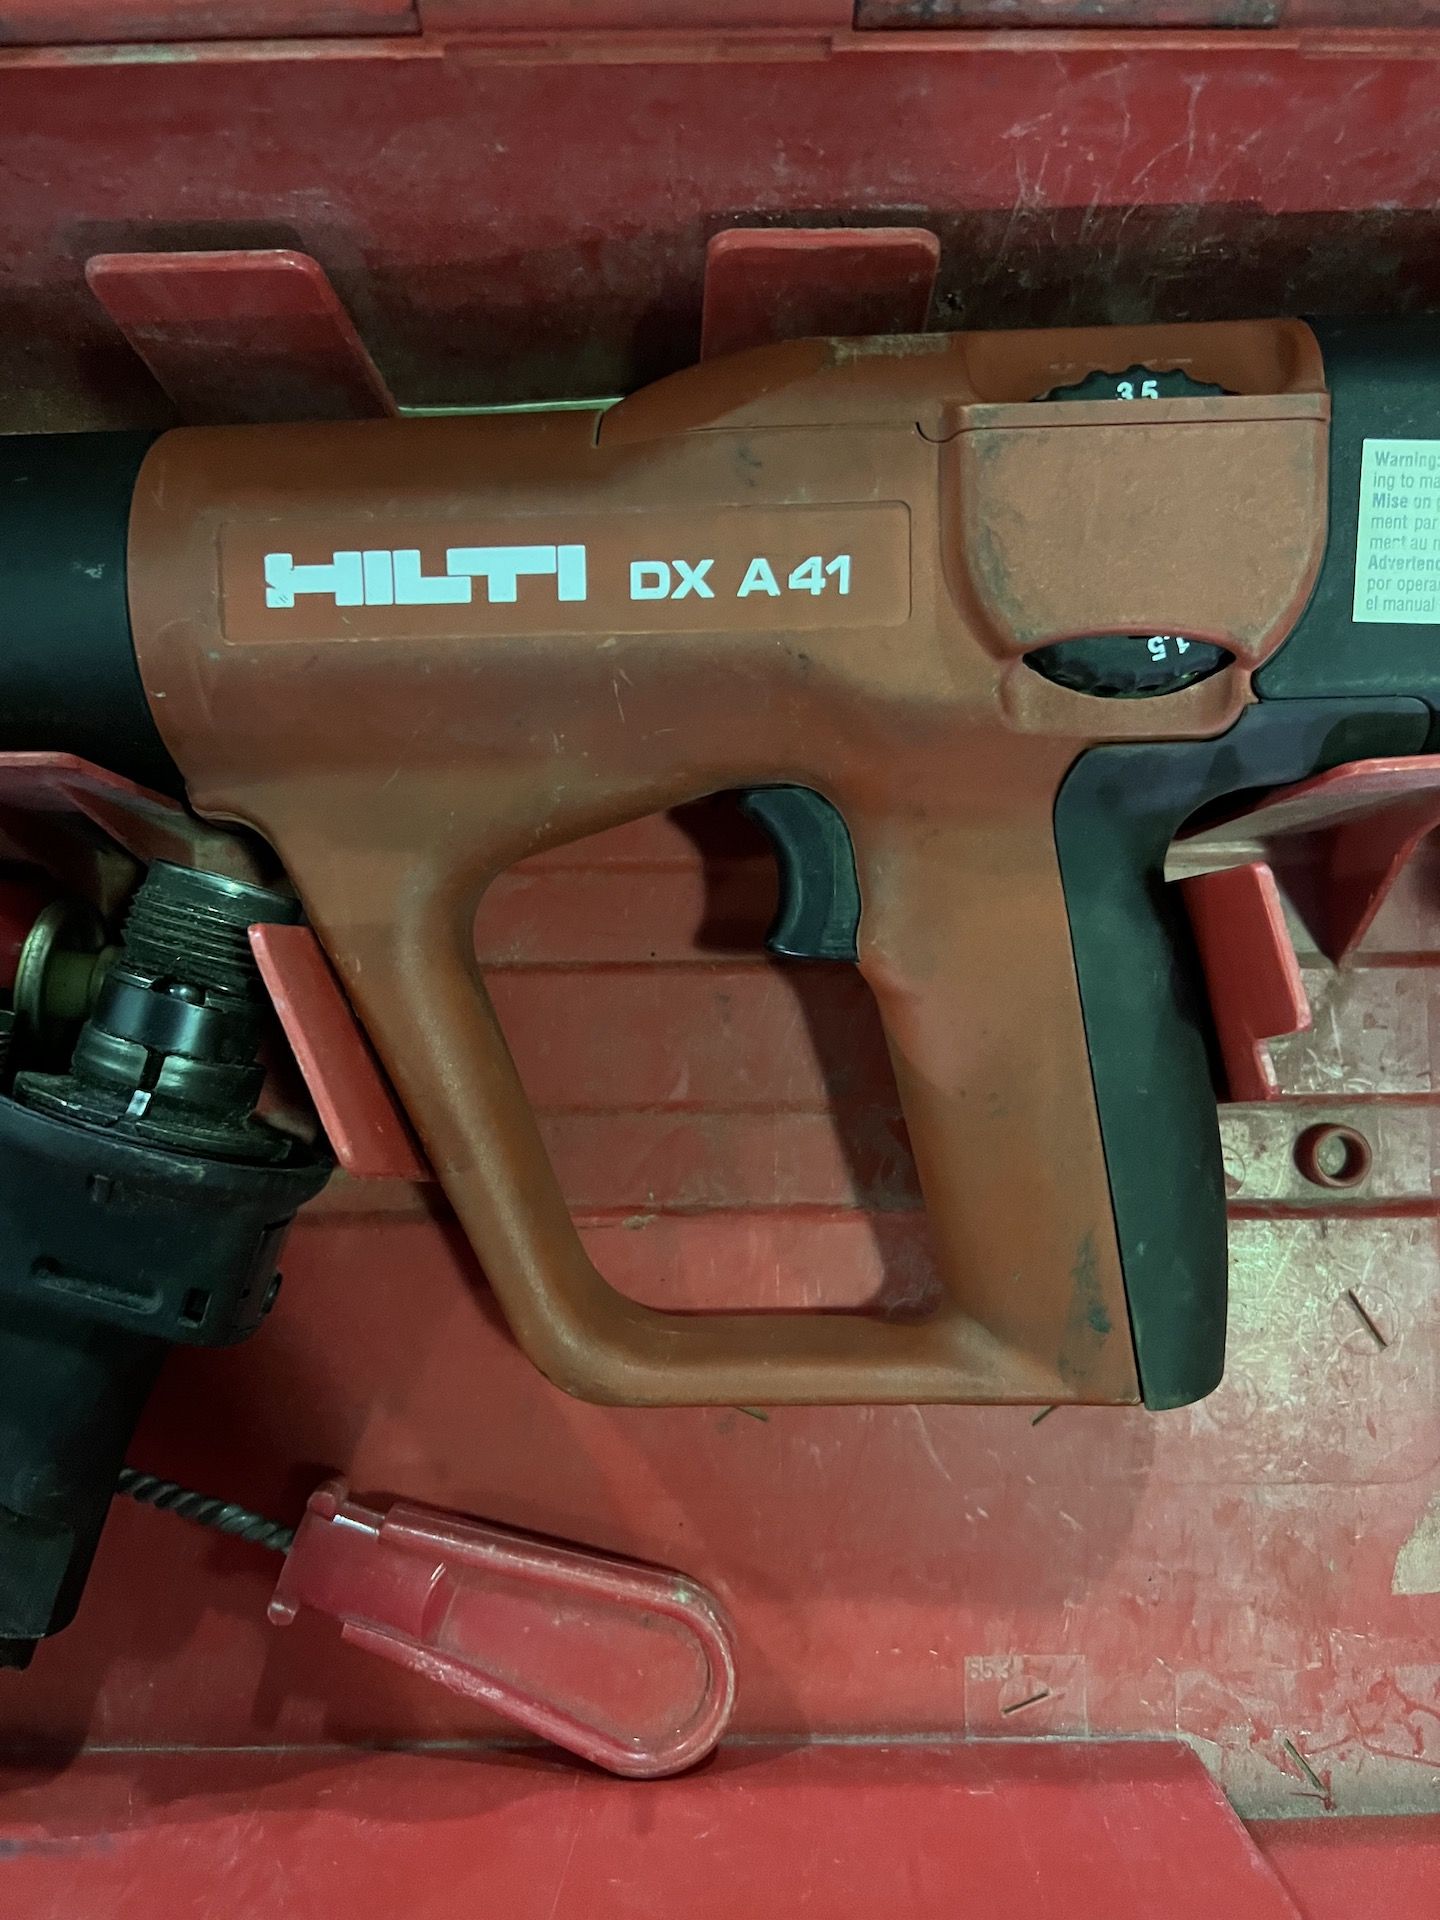 HILTI DX A41 POWDER ACTUATED NAIL GUN WITH X-1M72 MAGAZINE - Image 8 of 13